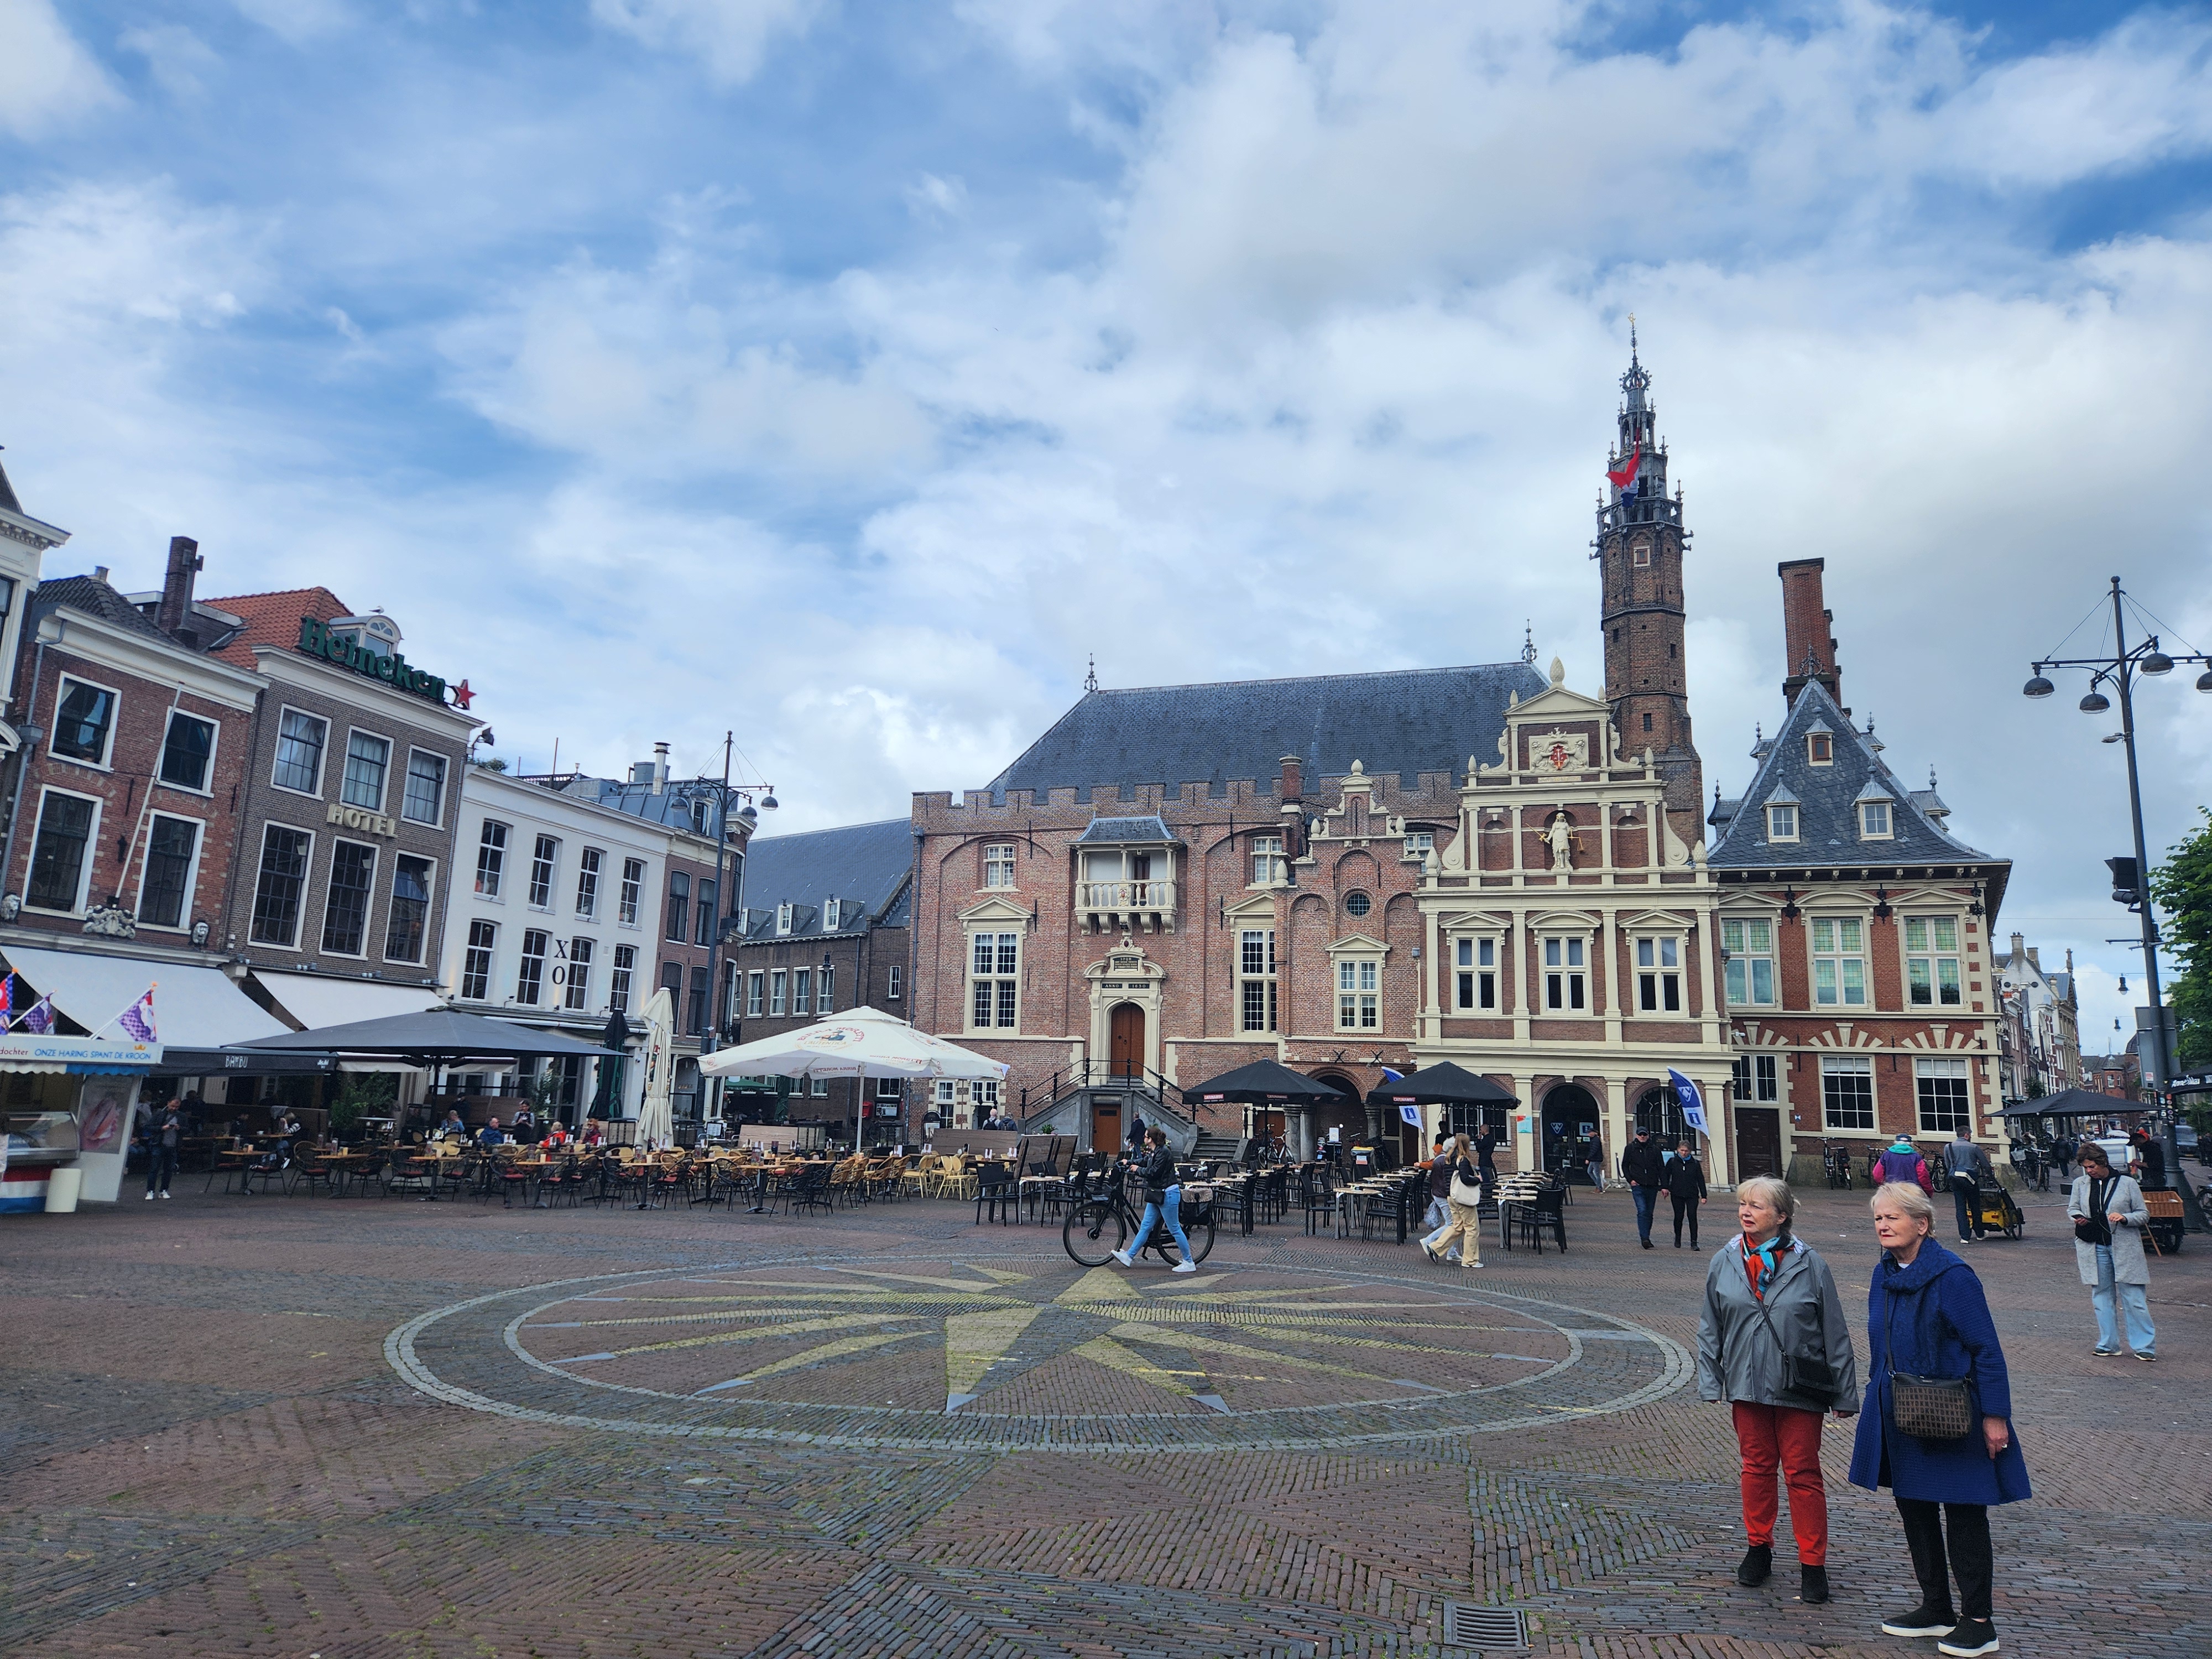 The square at Haarlem, there is a large townhall and other old buildings, the square is decorative brick